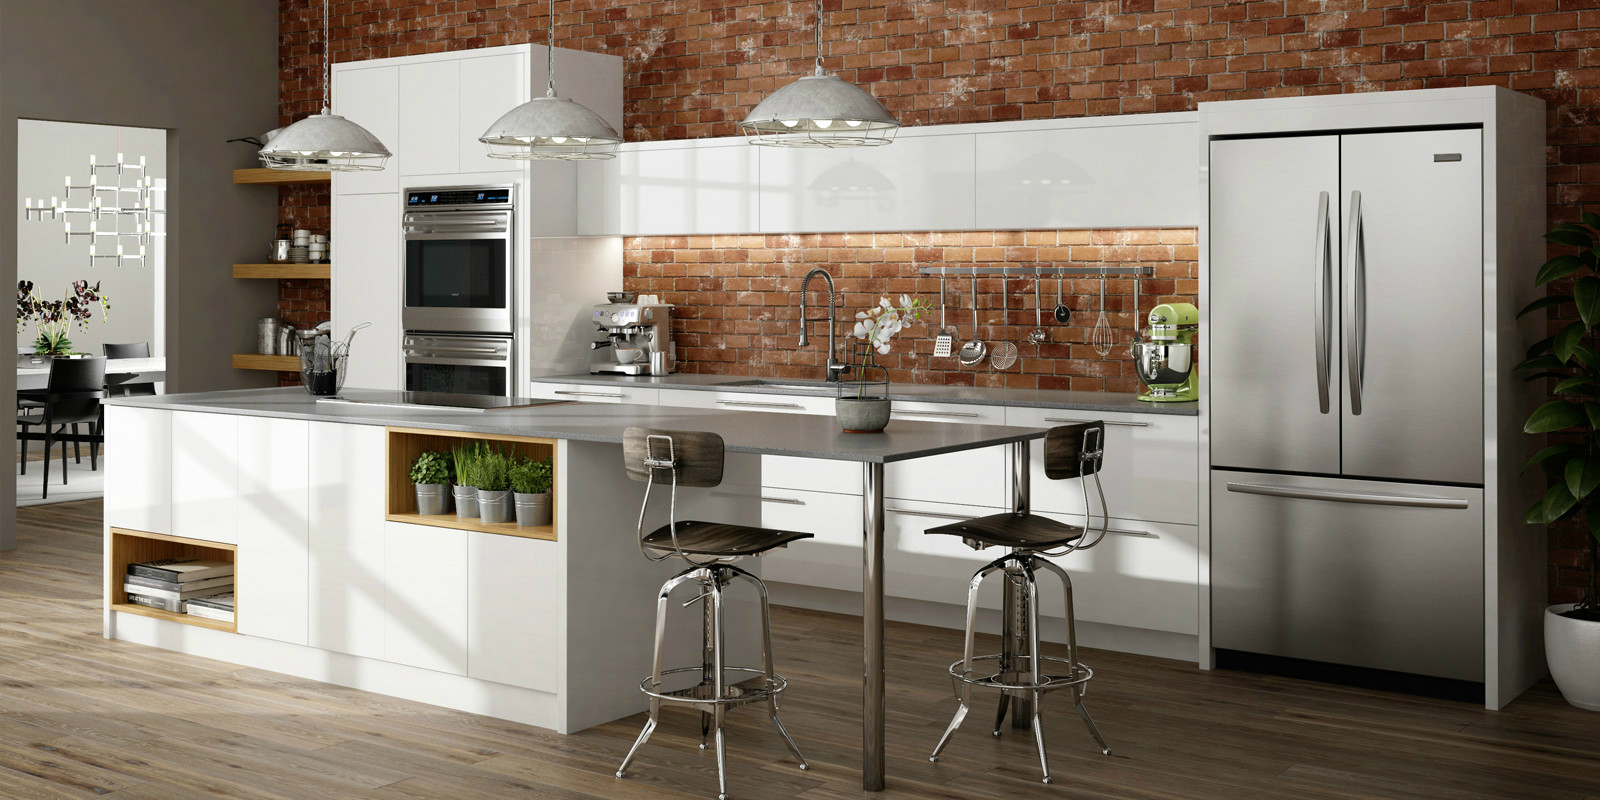 Latitude Cabinets at Lowe's | Modern Frameless Kitchen and ...